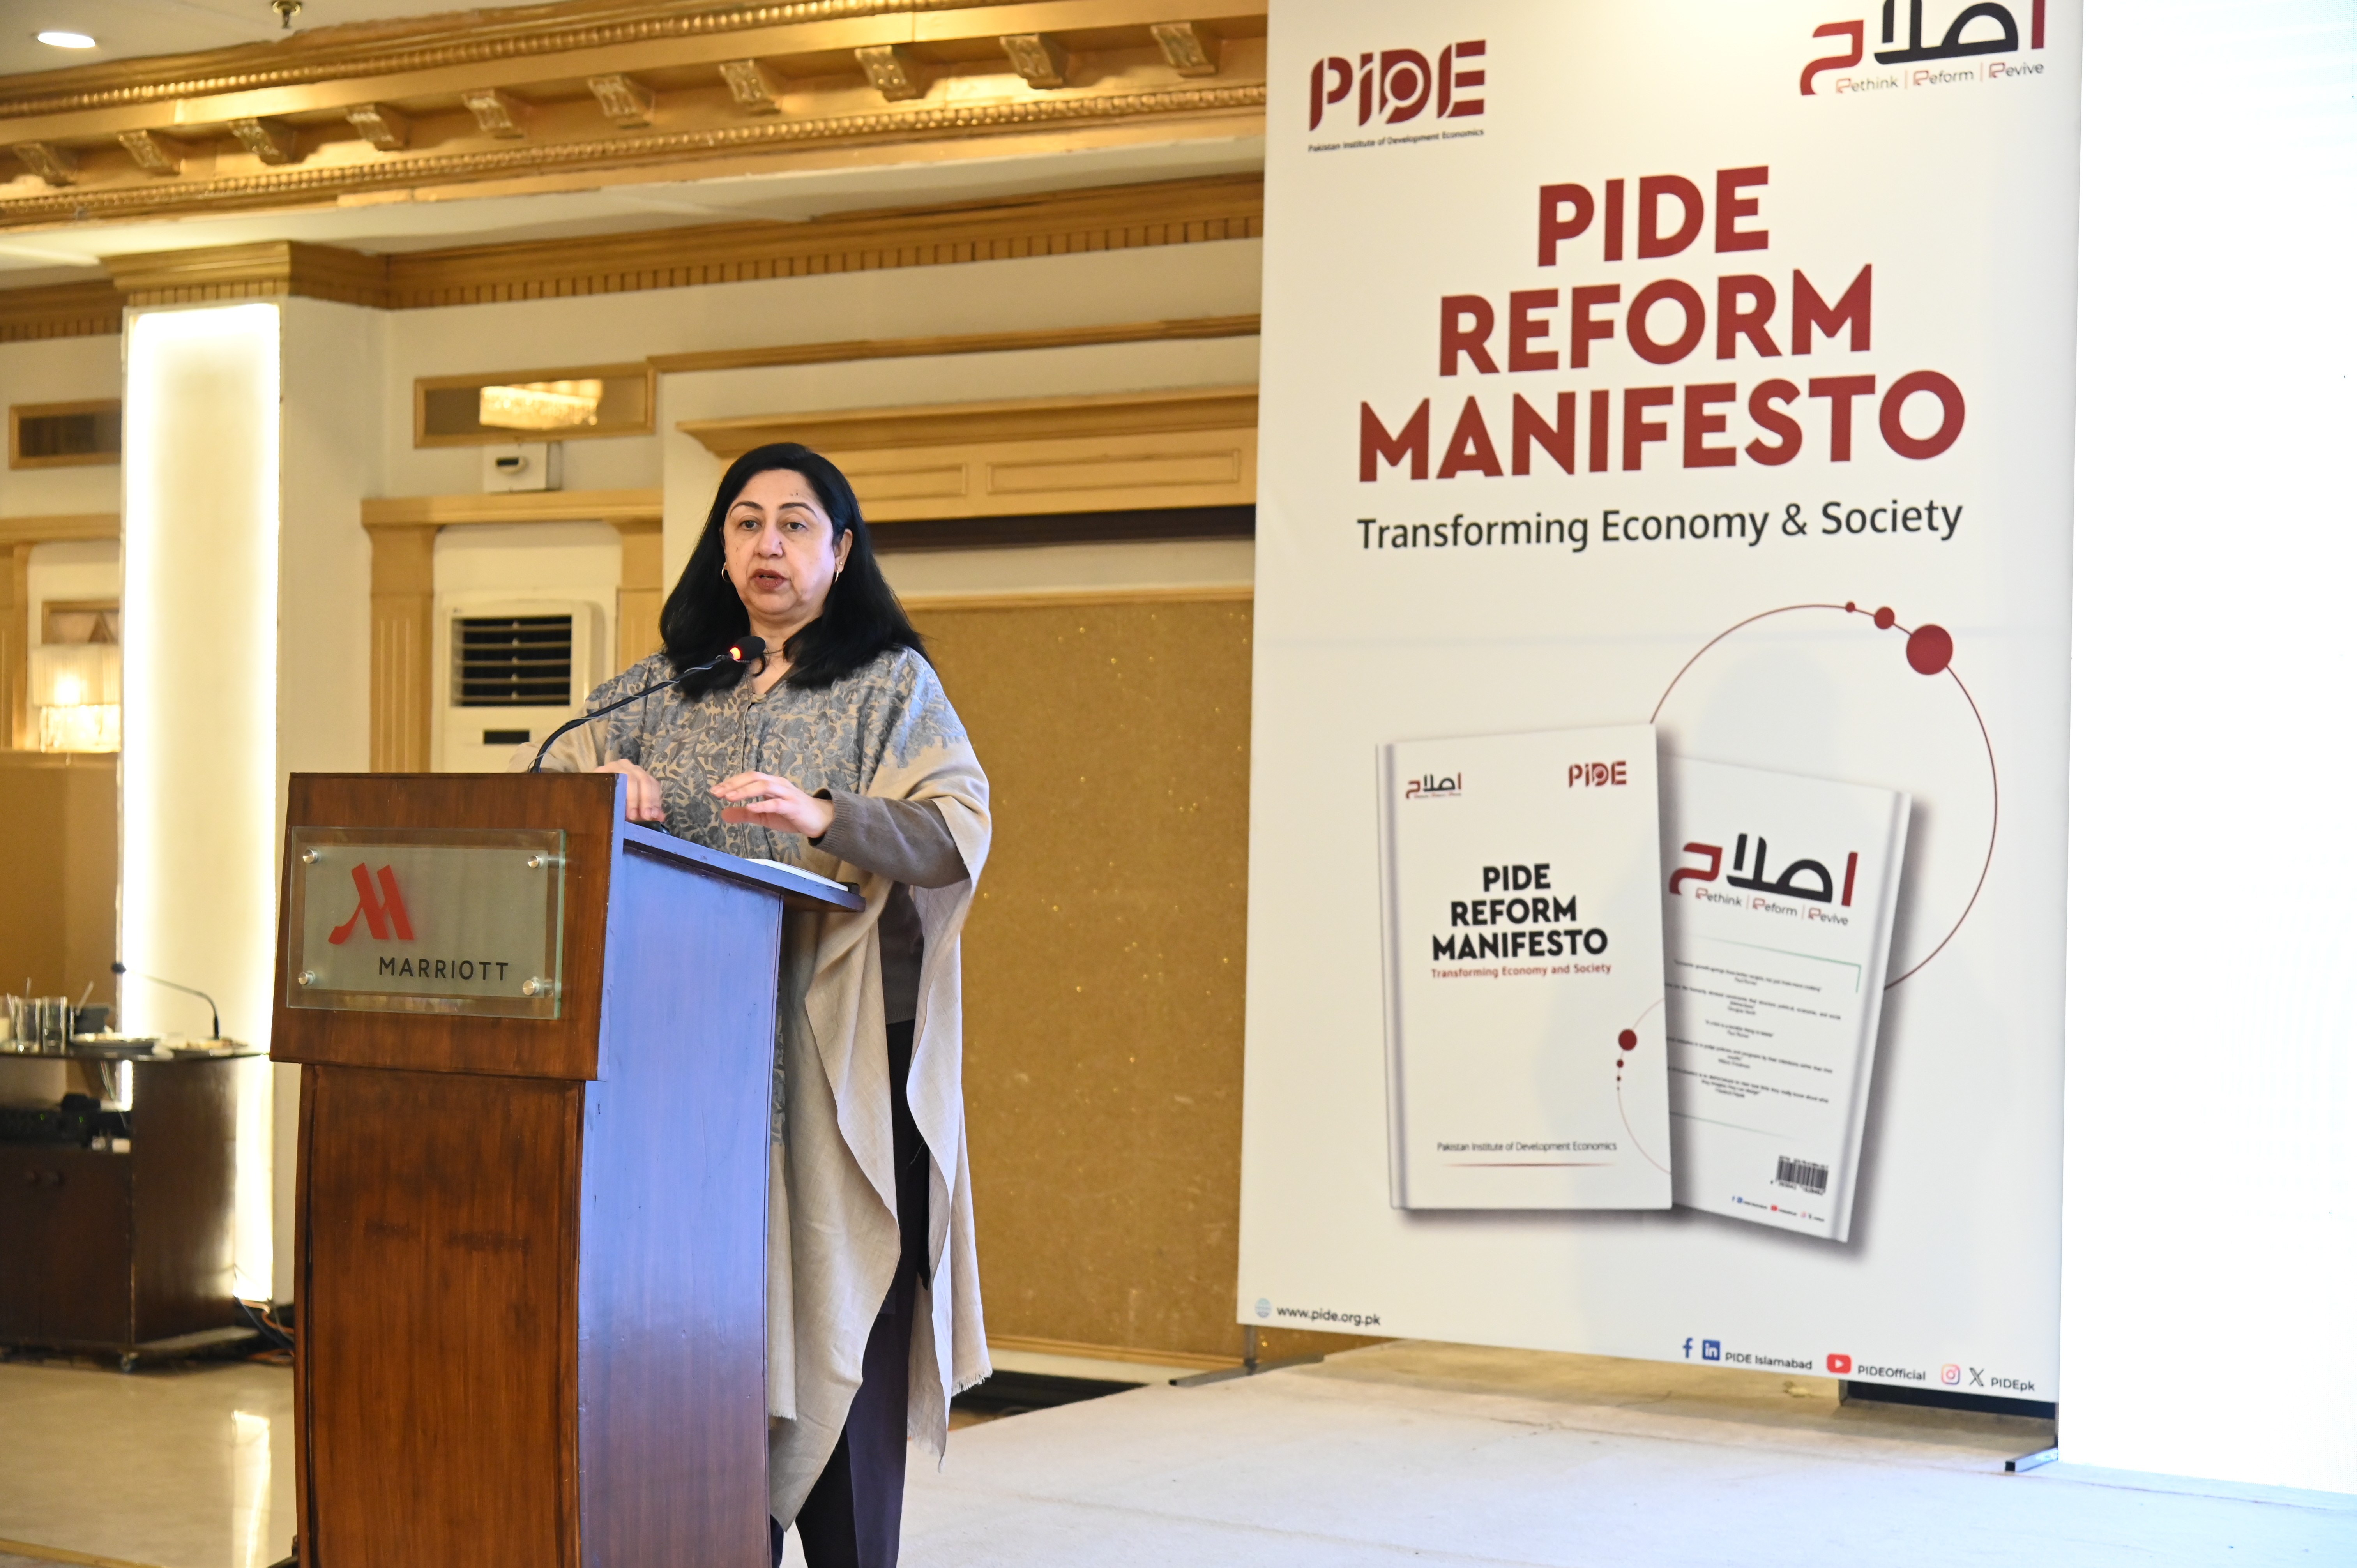 Dr Durr-e-Nayab, Joint Director/Pro Vice-Chancellor at PIDE expressing her views on the reform manifesto